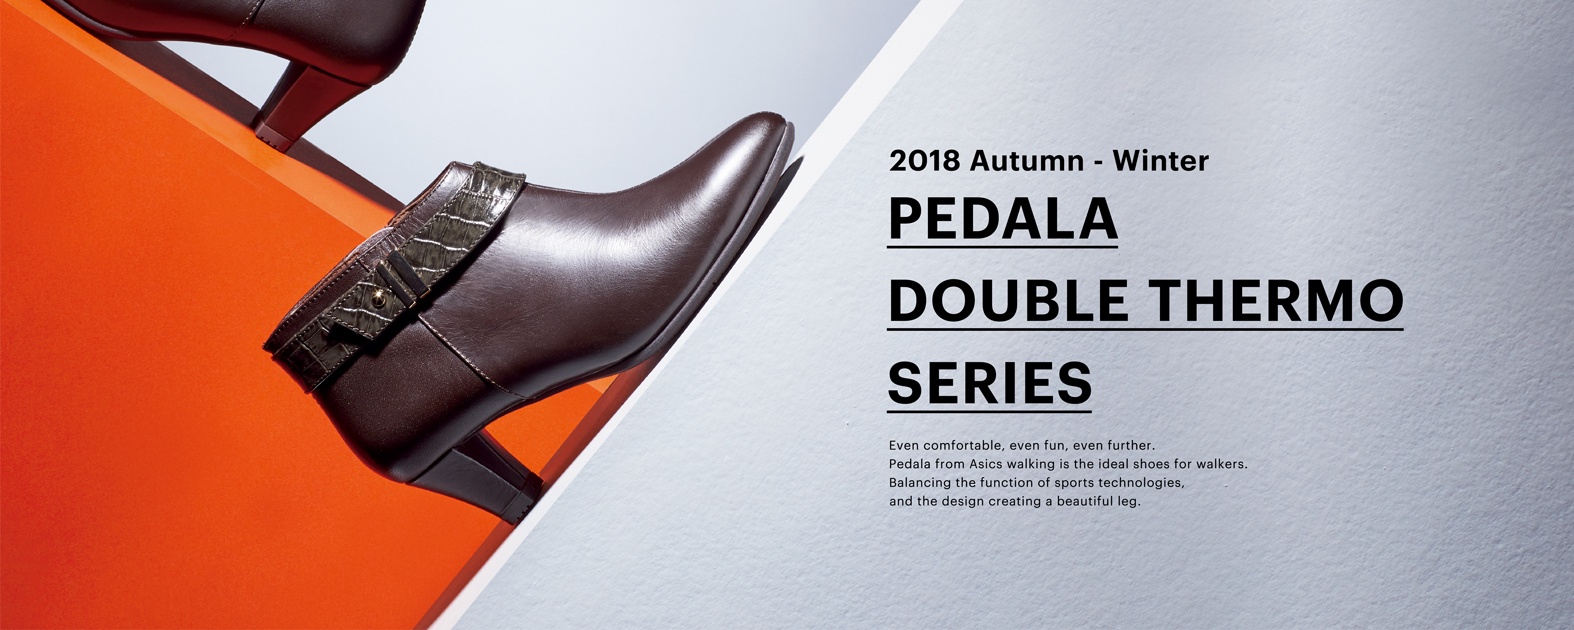 PEDALA DOUBLE THERMO SERIES